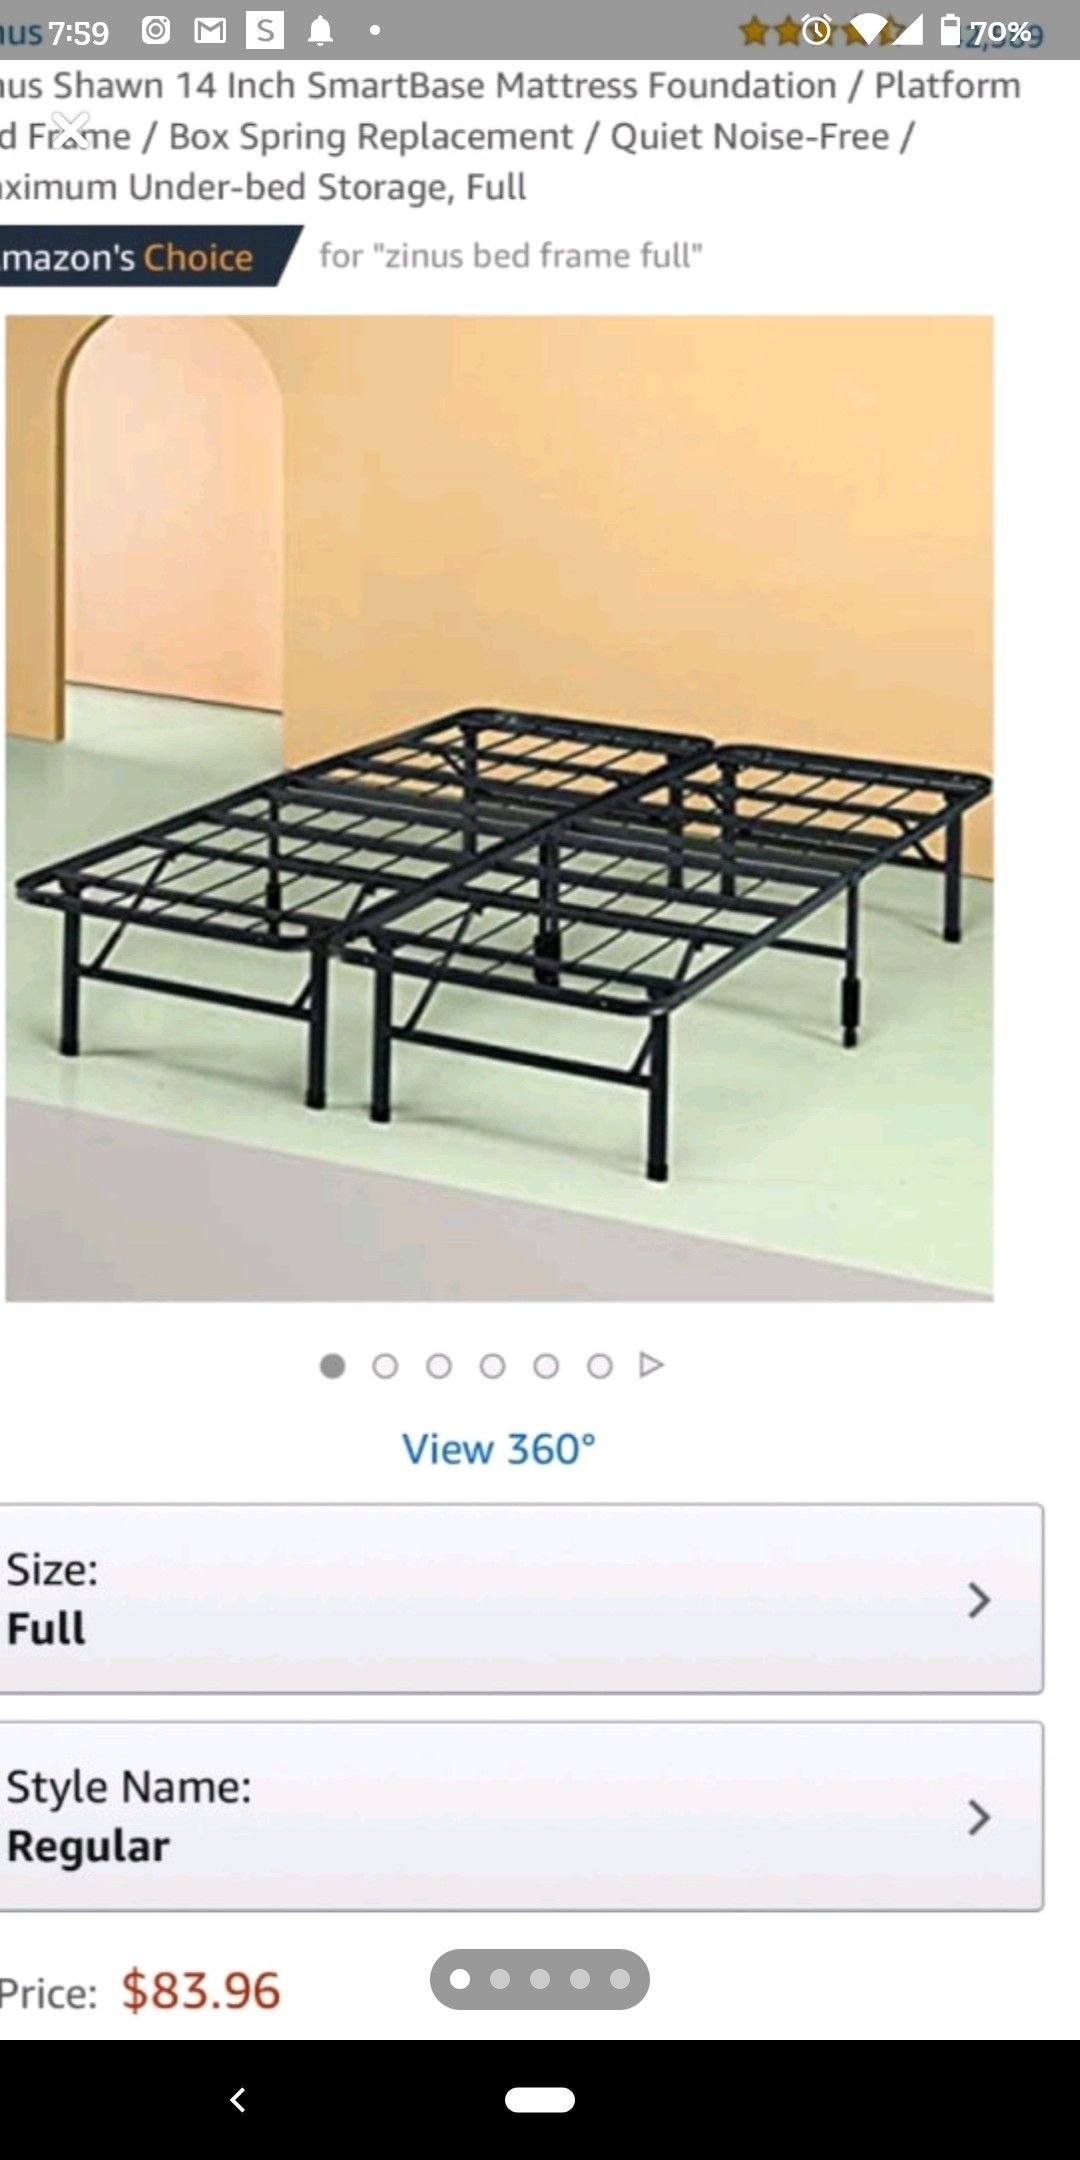 Classic Metal Platform Bed Frame with Steel Slat Support / Mattress Foundation, Full